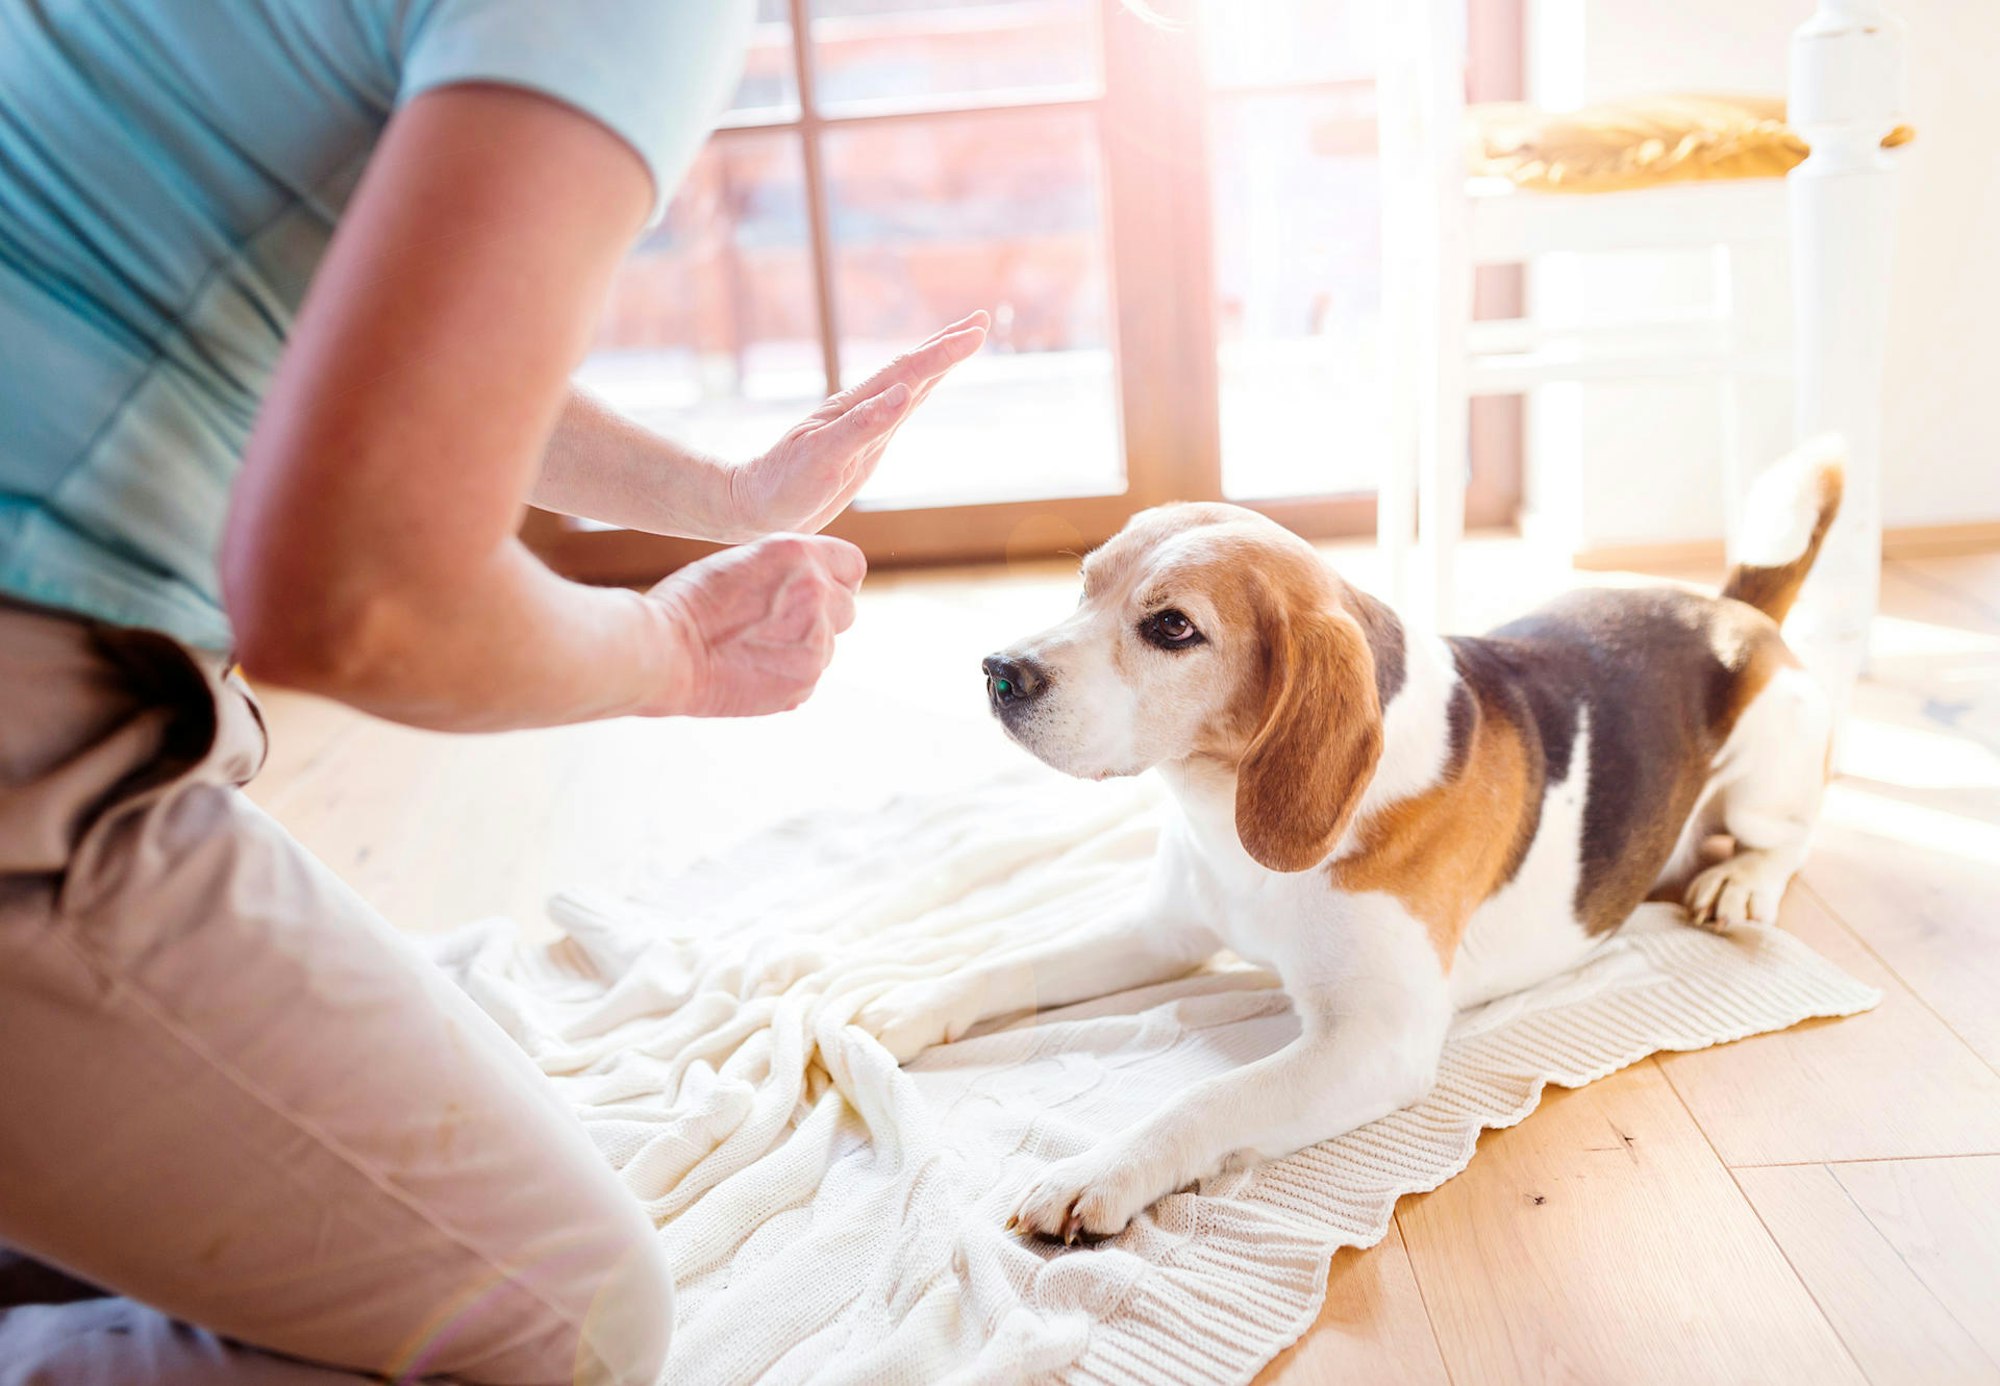 BeagleGettyImages_HAlfpoint-484742816